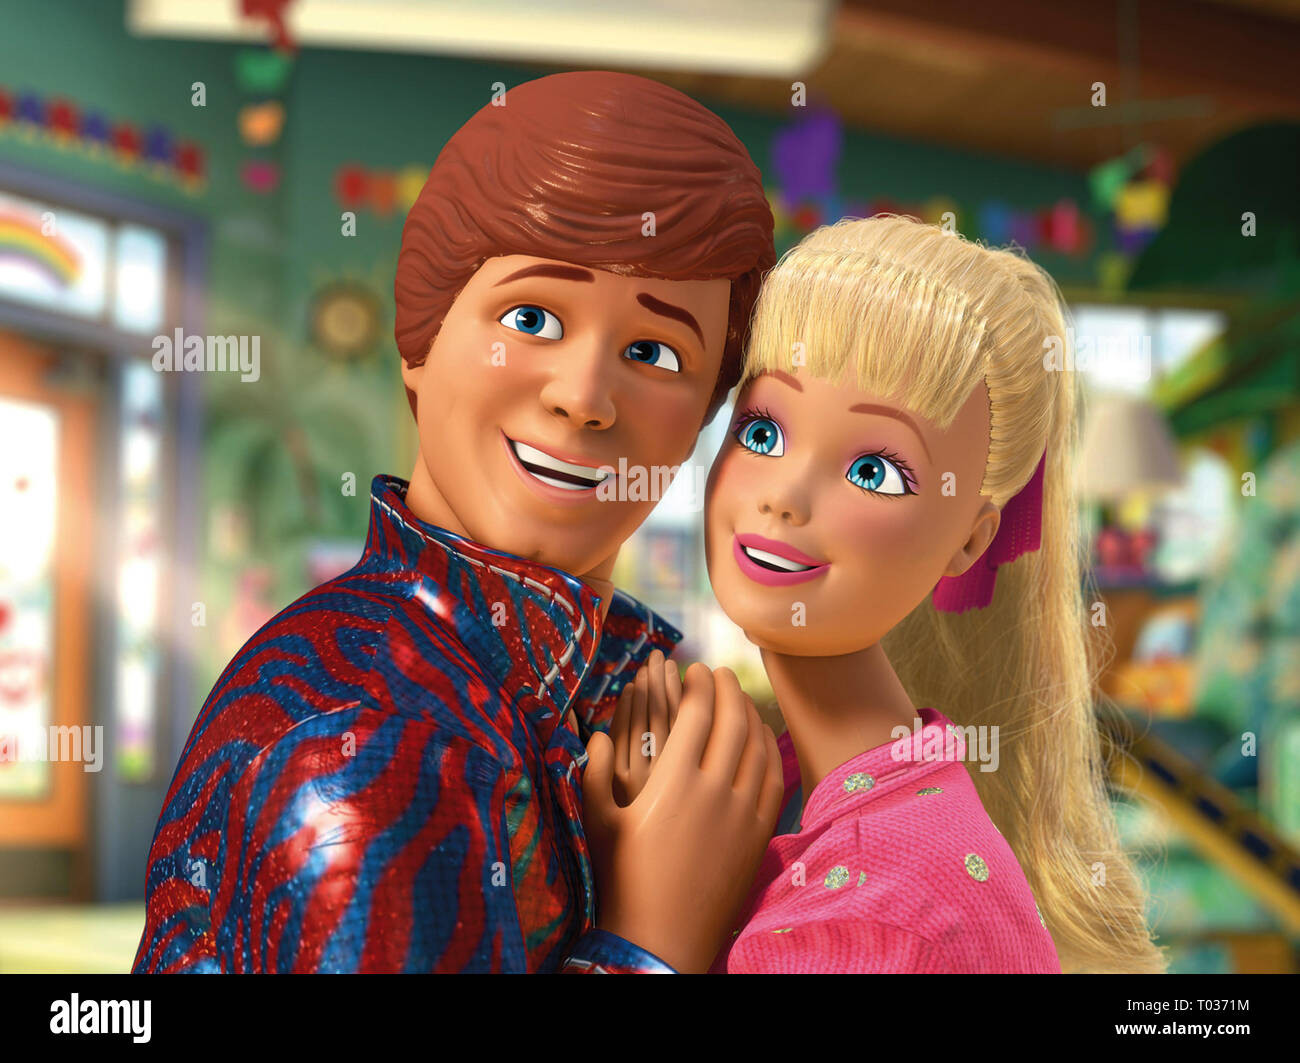 Barbie And Ken High Resolution Stock Photography and Images - Alamy